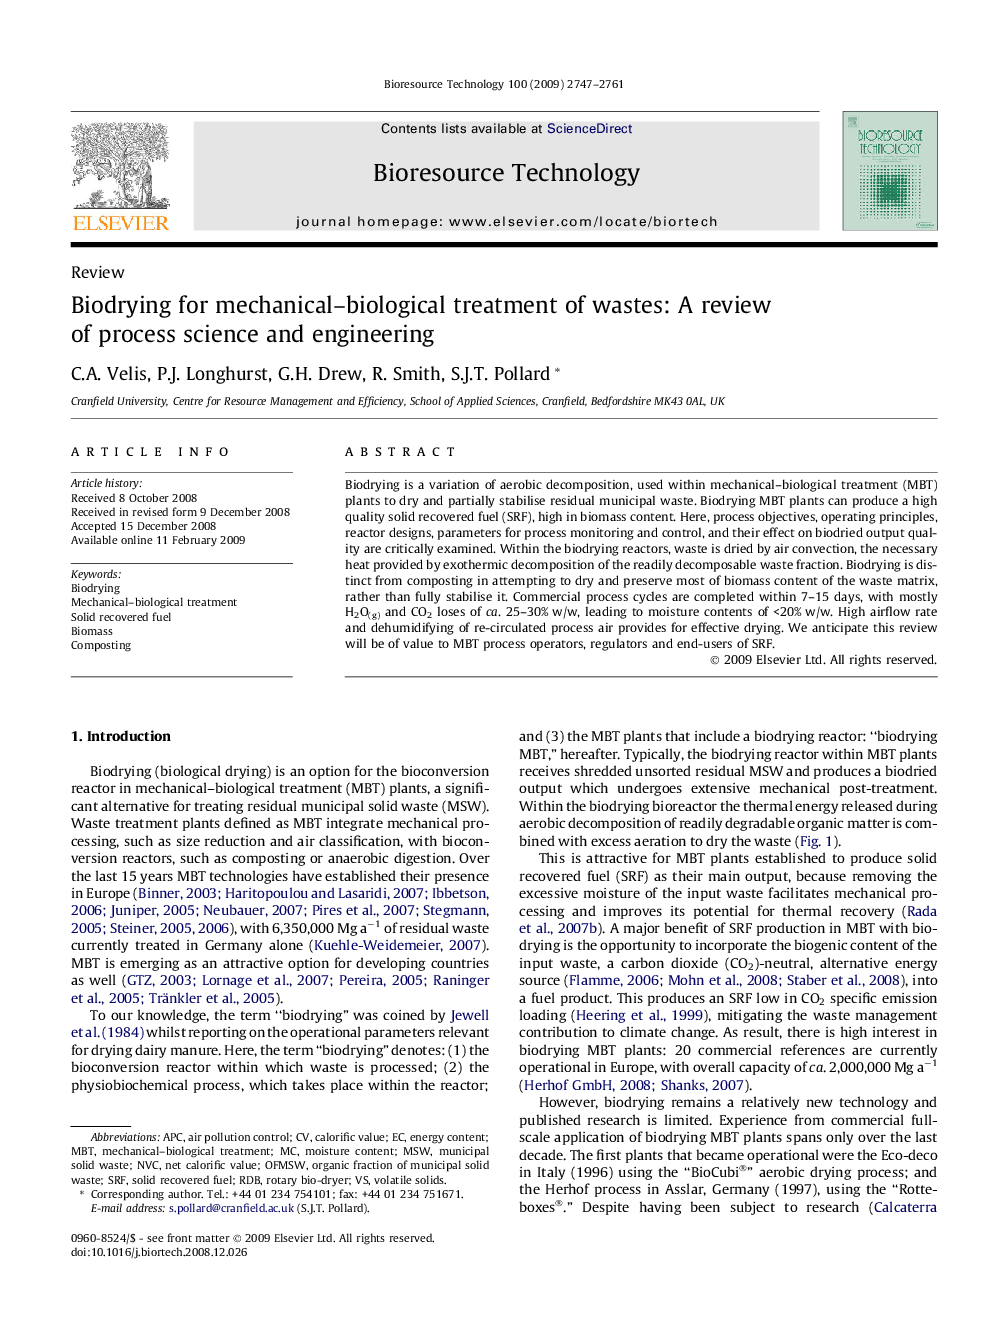 Biodrying for mechanical–biological treatment of wastes: A review of process science and engineering